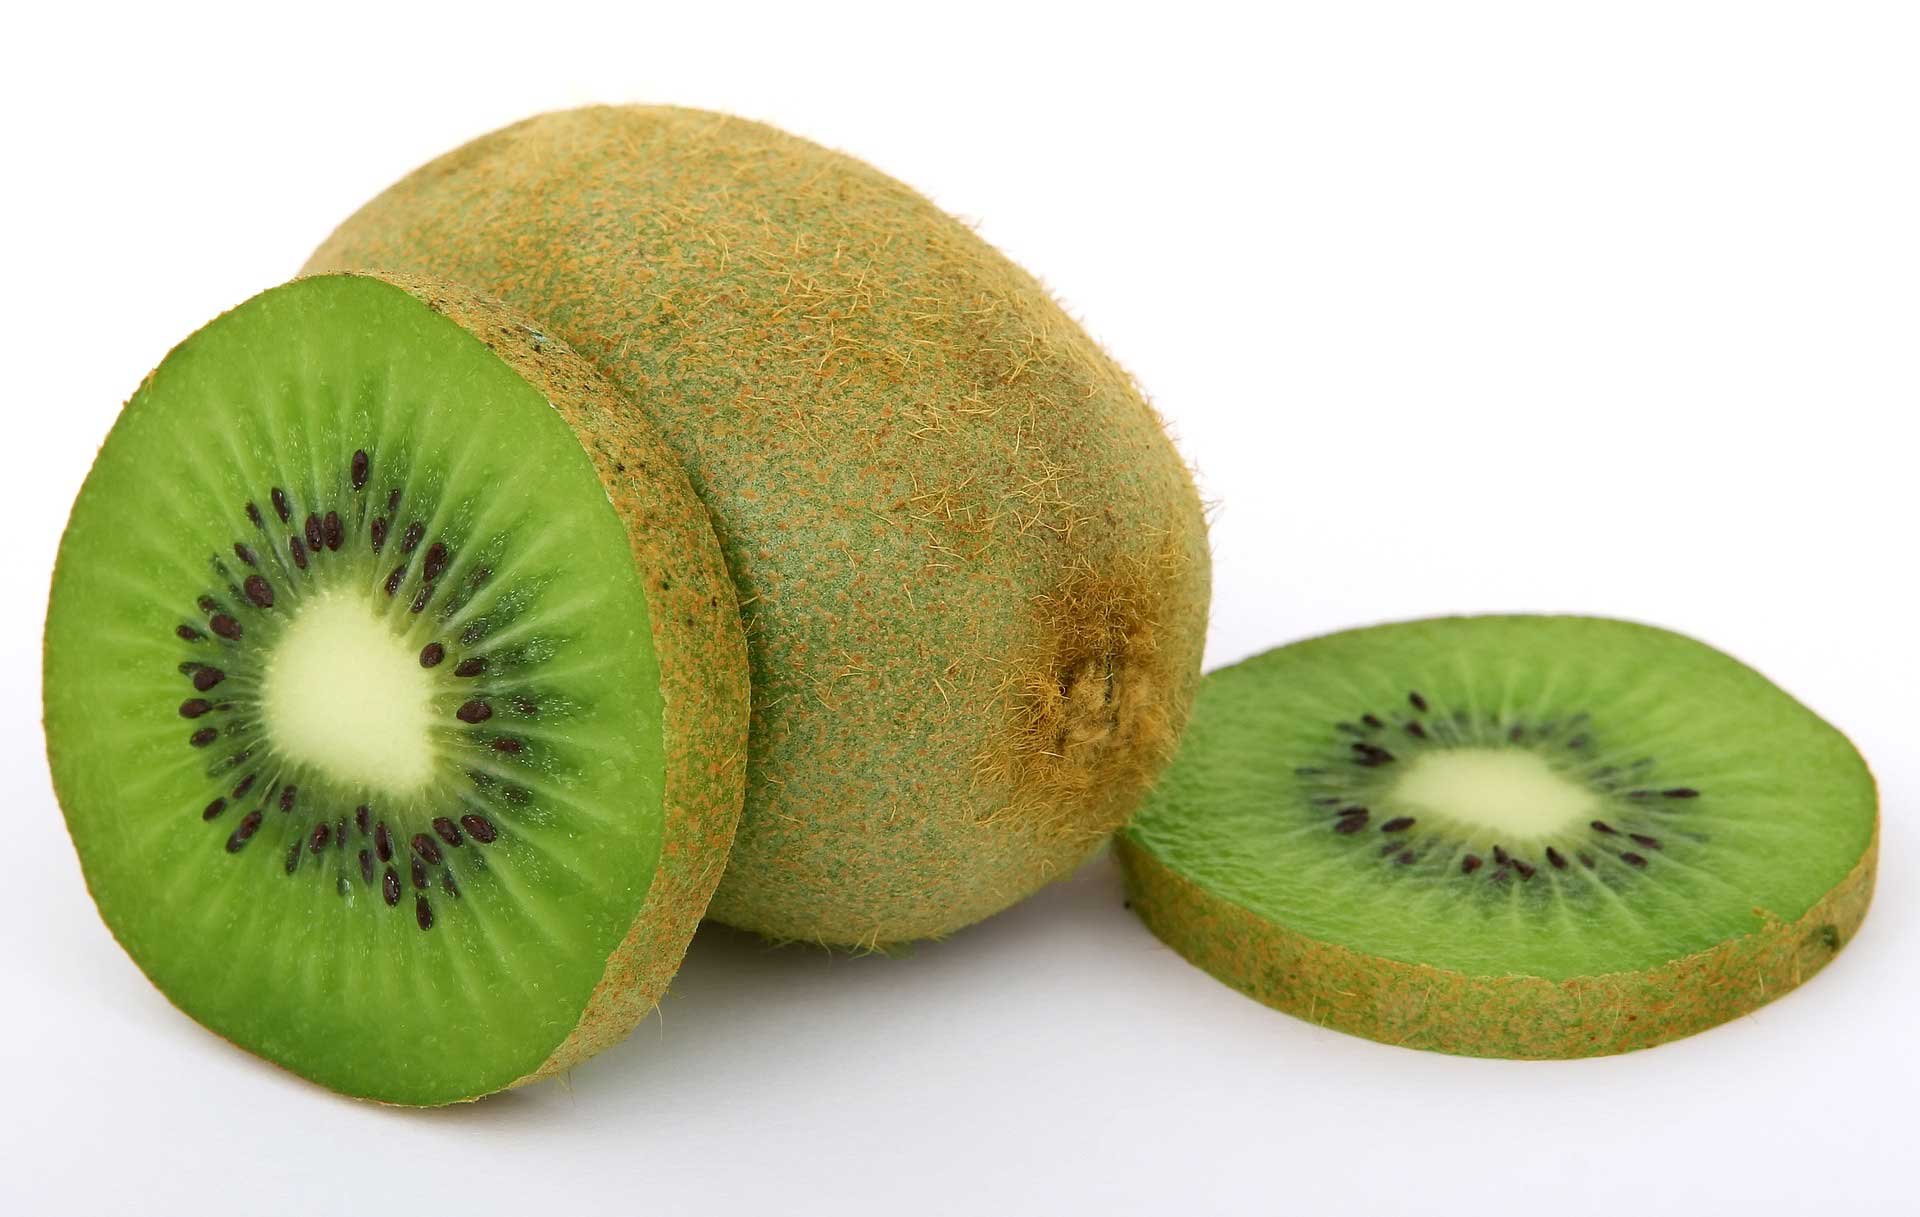 Kiwi Fruit - Learn About Nature